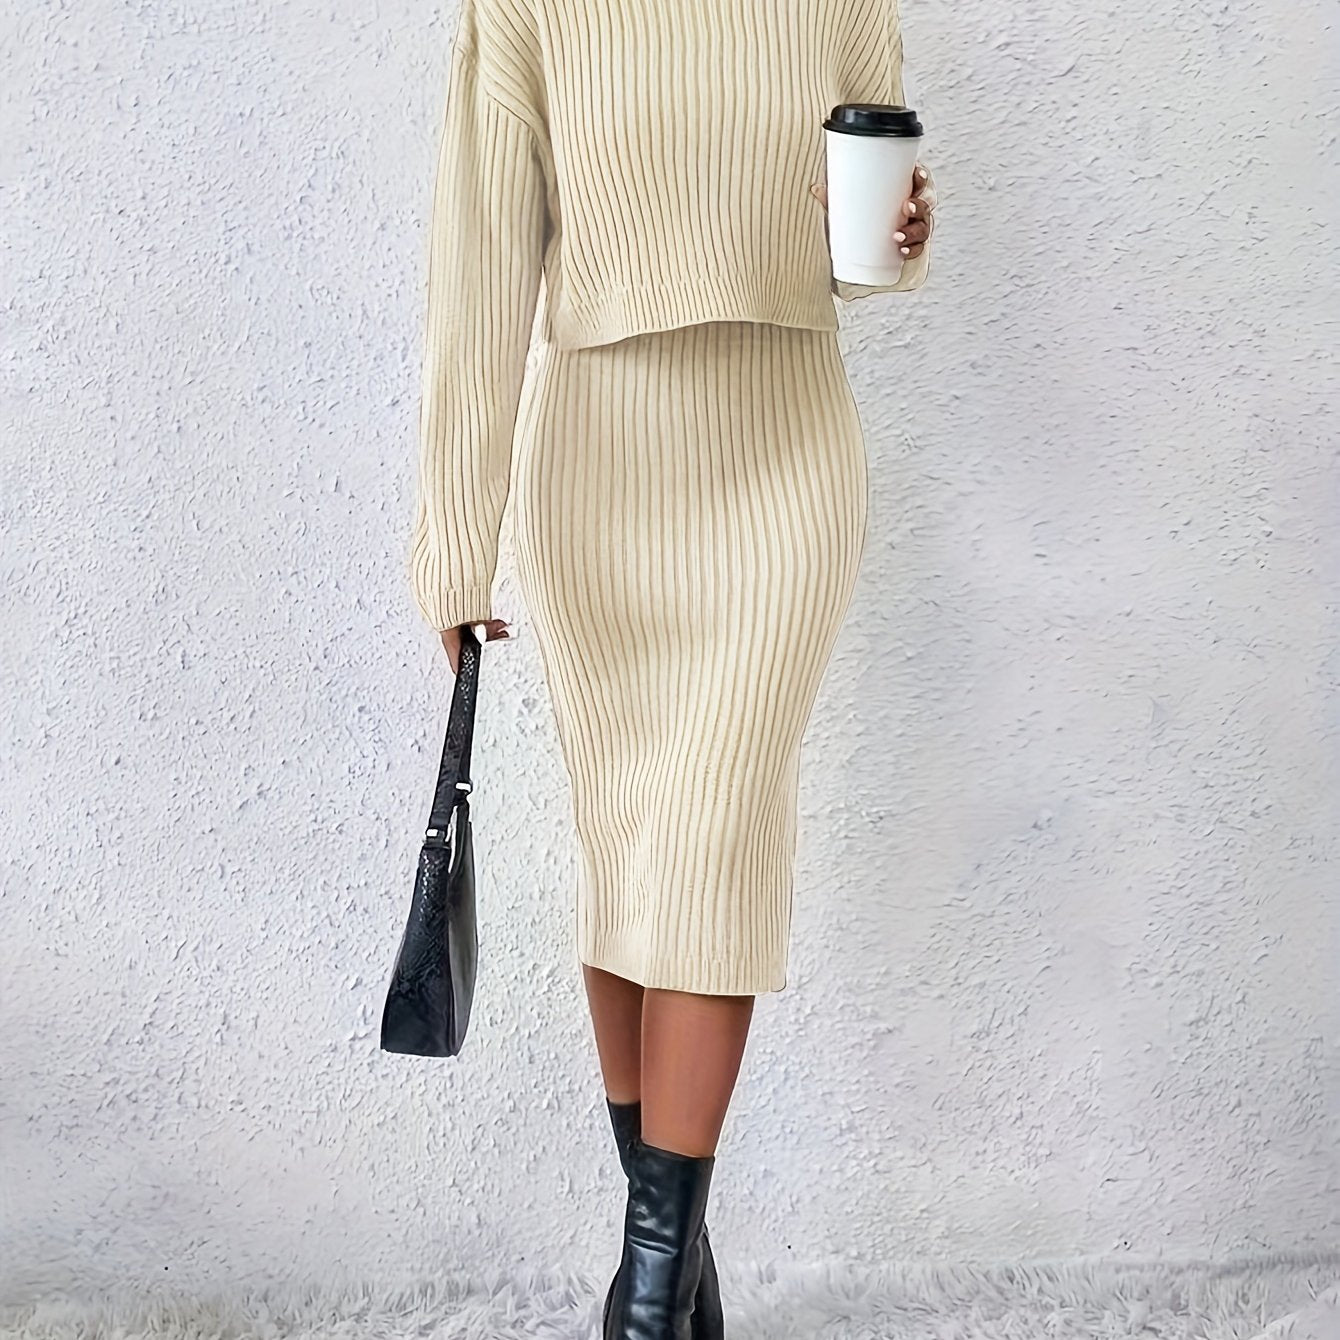 Casual Sweater Two-piece Set, Turtleneck Long Sleeve Tops & Sleeveless Bodycon Dress Outfits, Women's Clothing